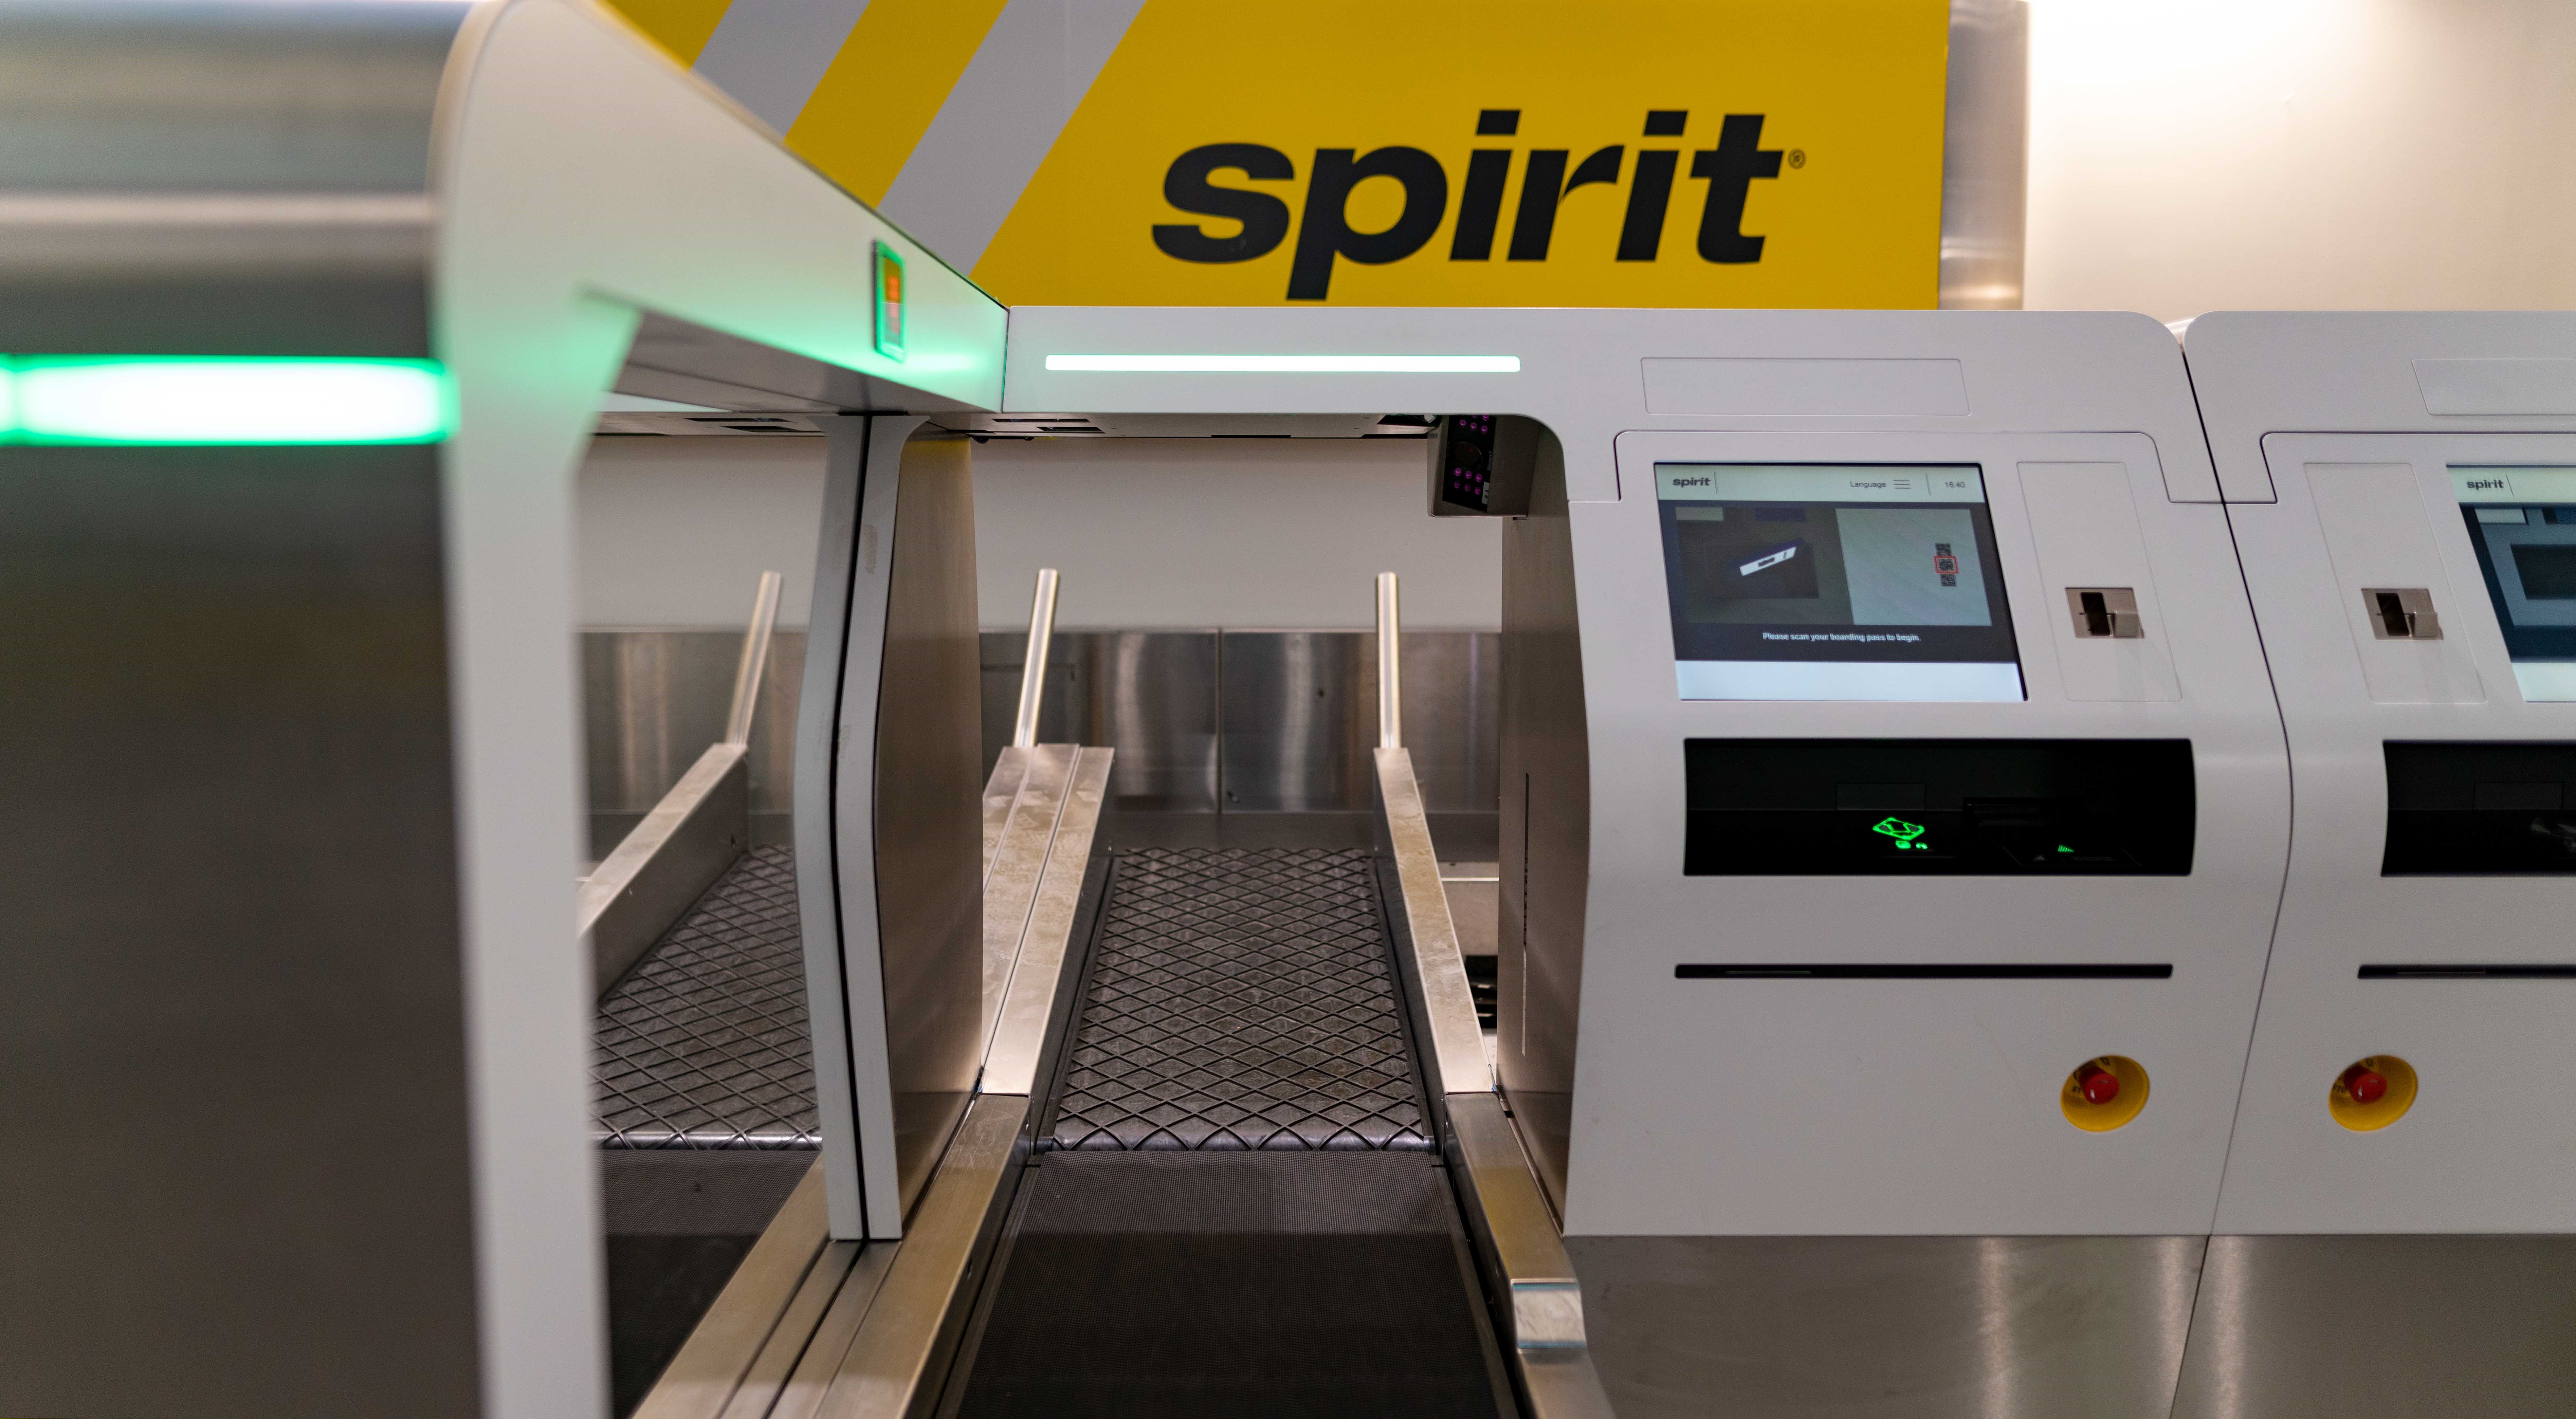 Spirit Airlines Speeds Up Trips at LaGuardia with new, automated Self-Bag Drop